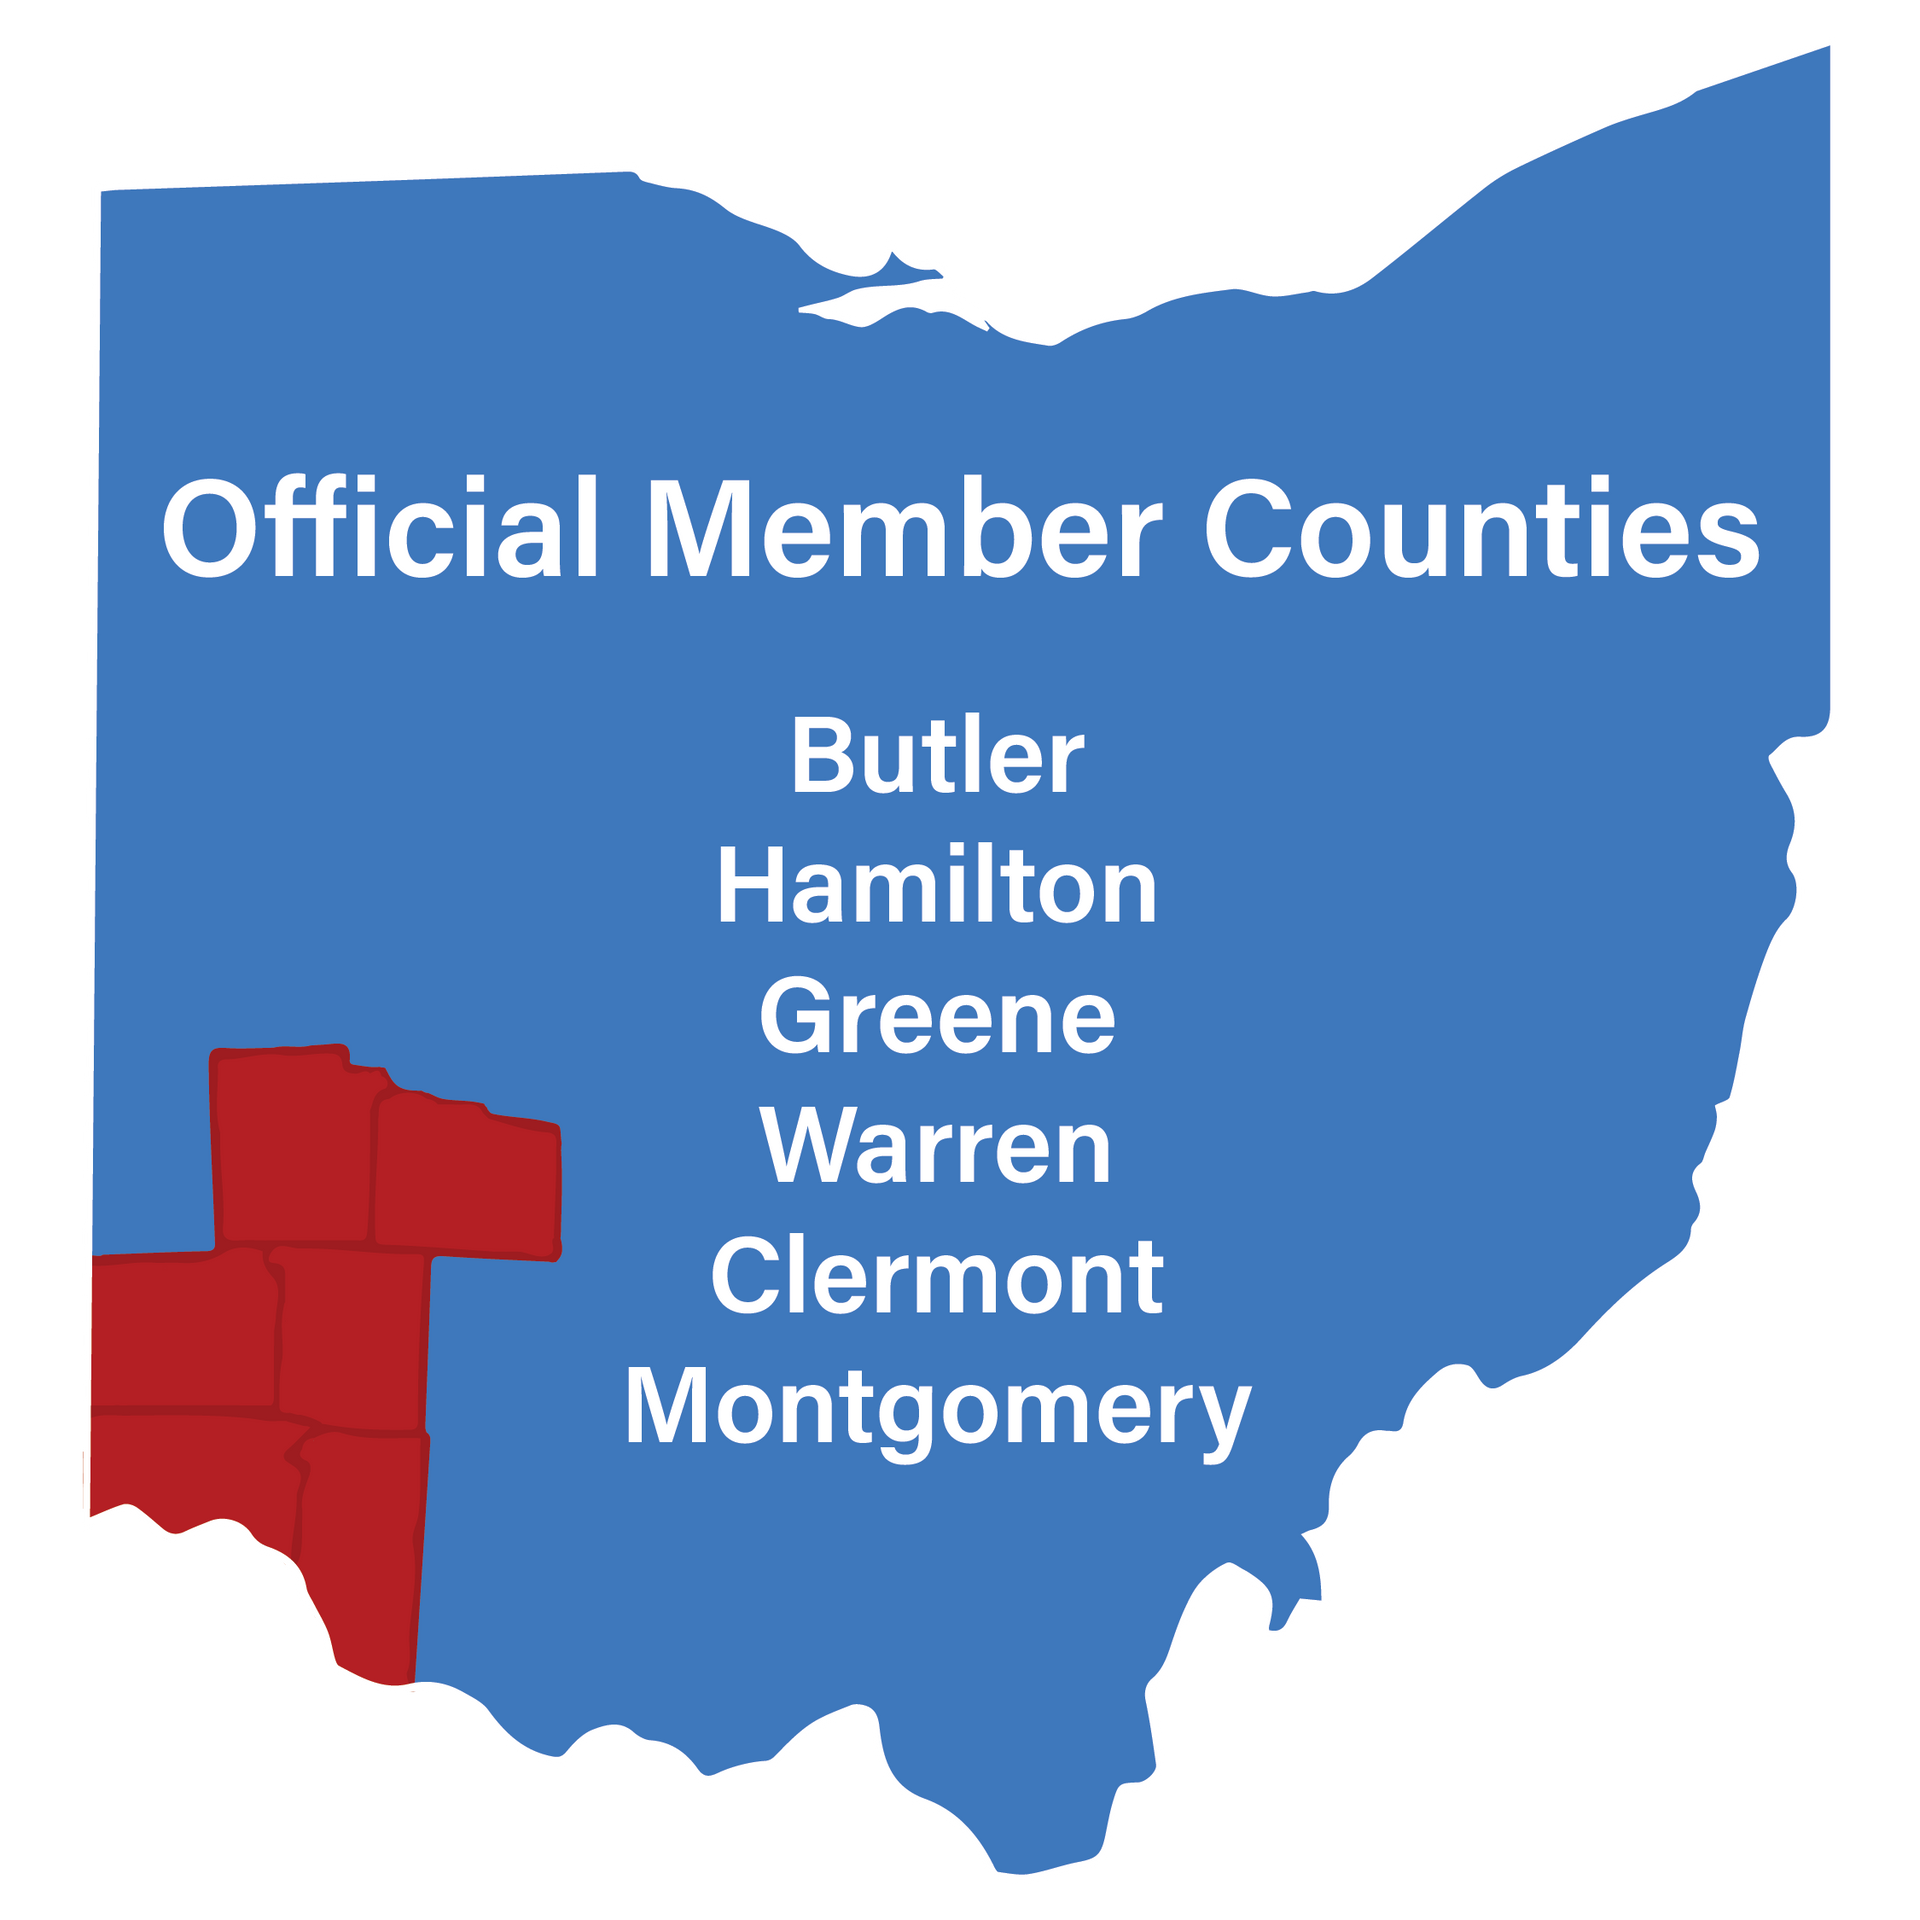 Official Member Counties. Butler, Hamilton, Greene, Warren, Clermont, and Montgomery county.